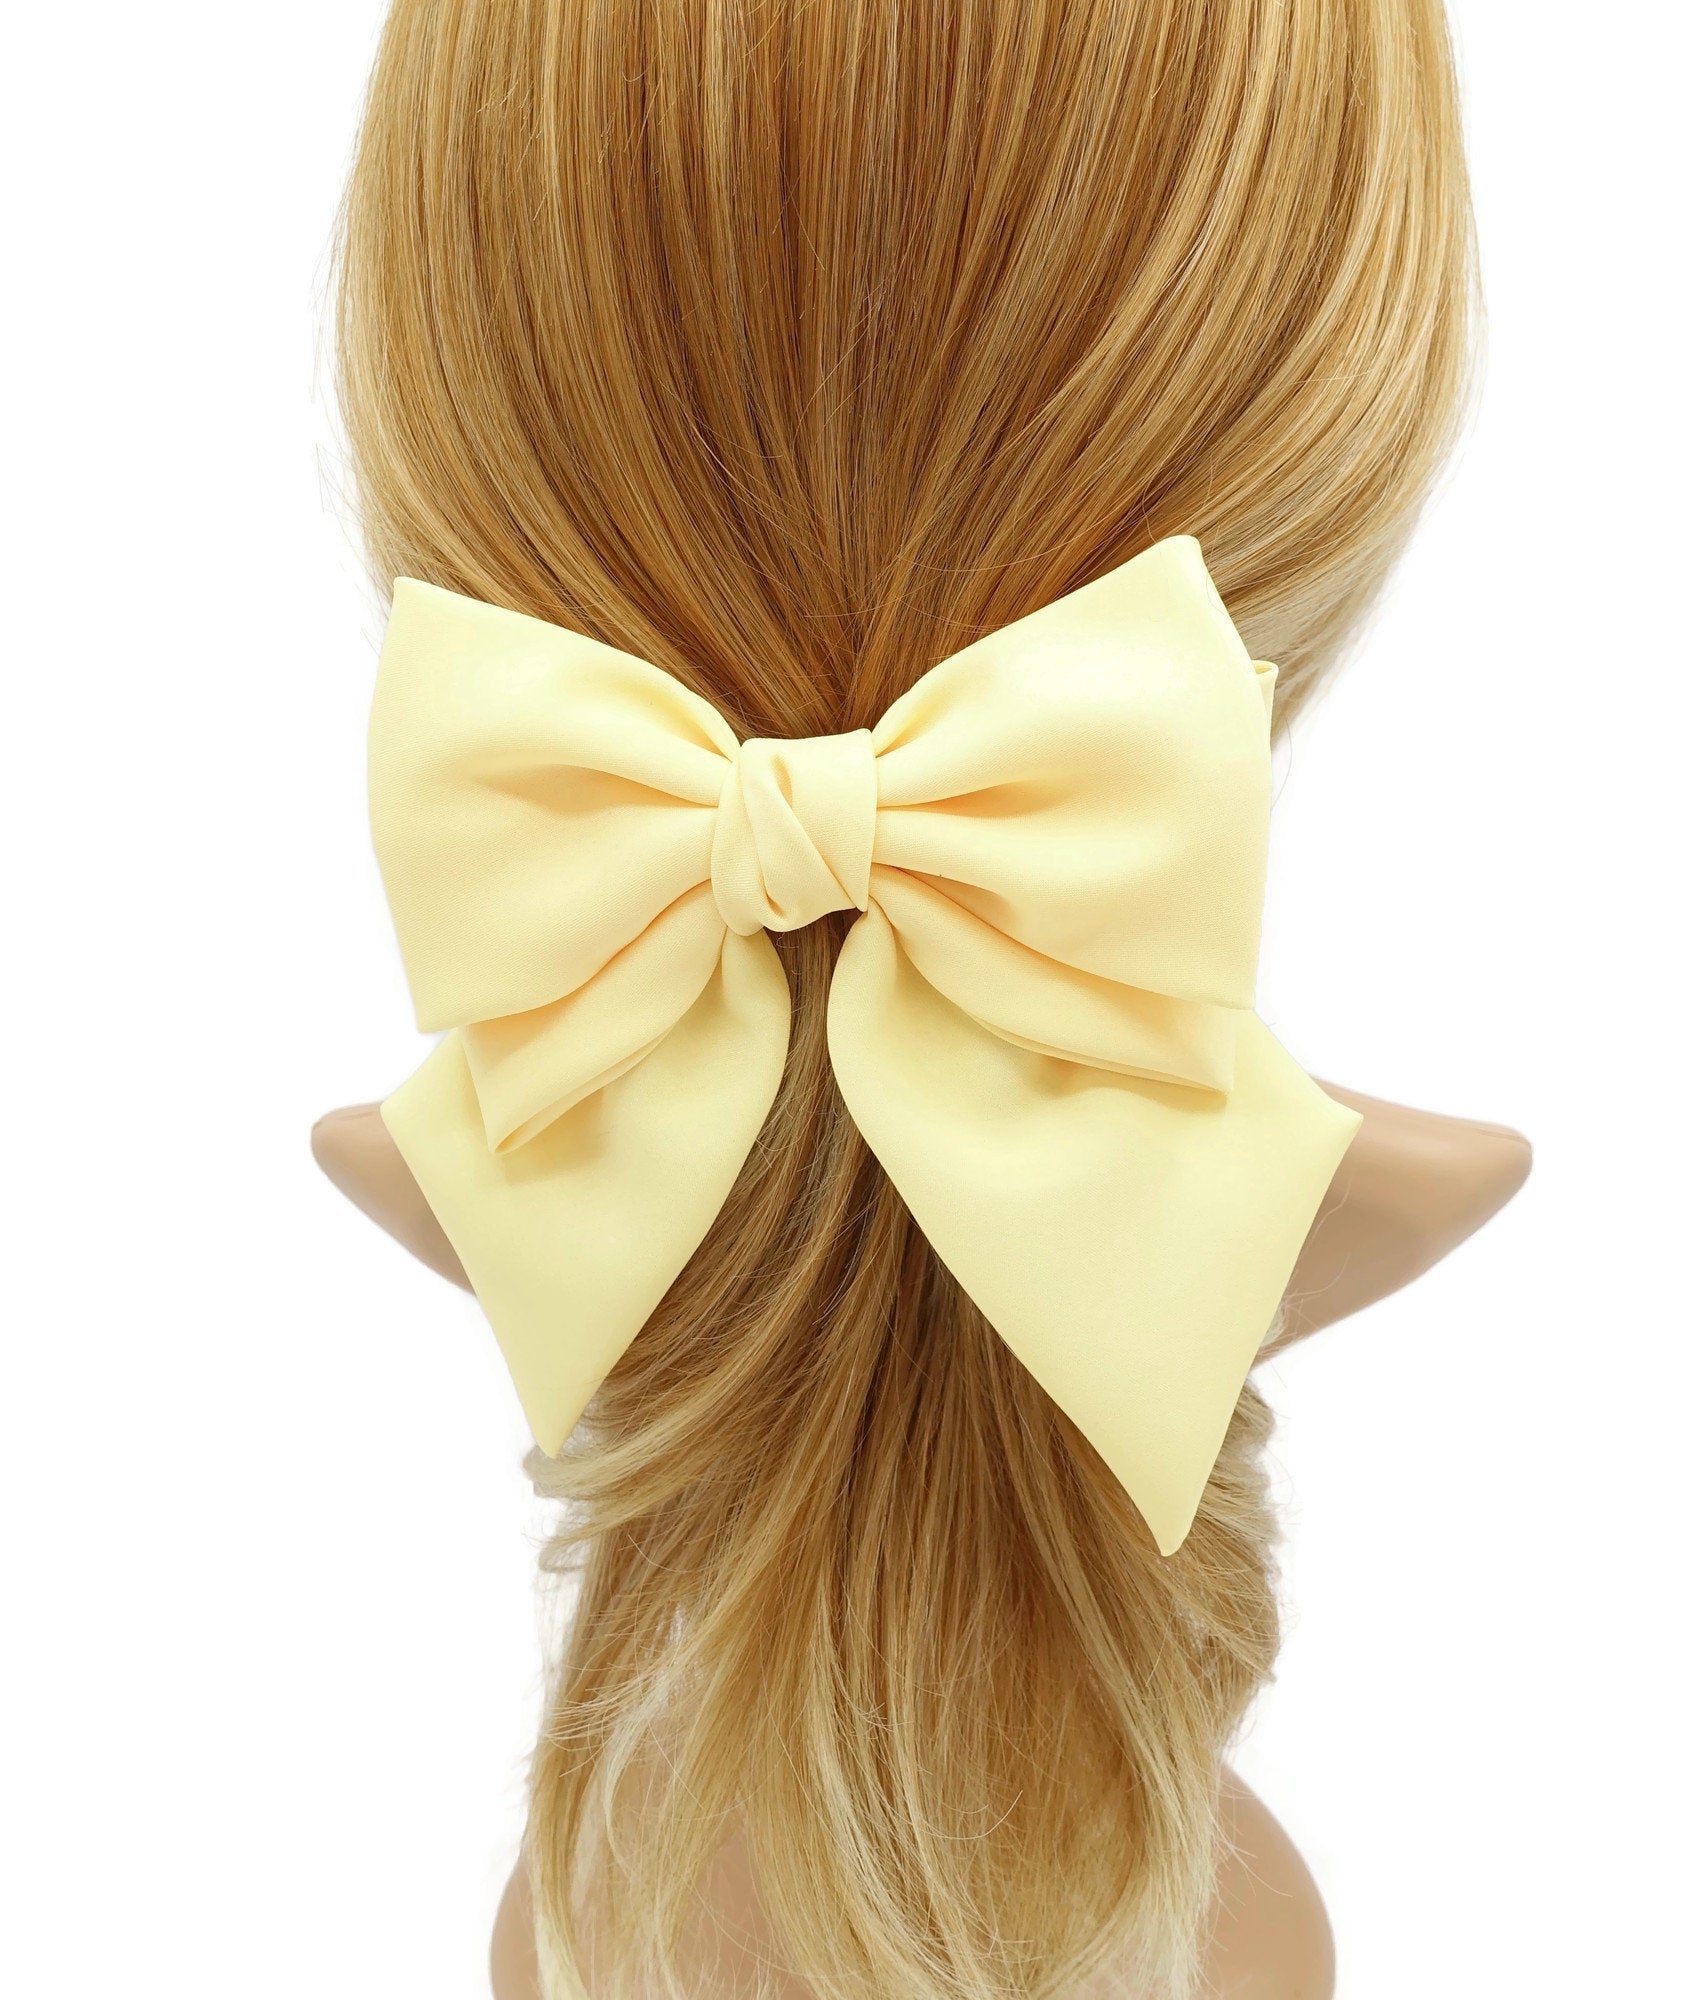 veryshine.com Barrette (Bow) Yellow thick double layered tail hair bow chiffon hair barrette for women